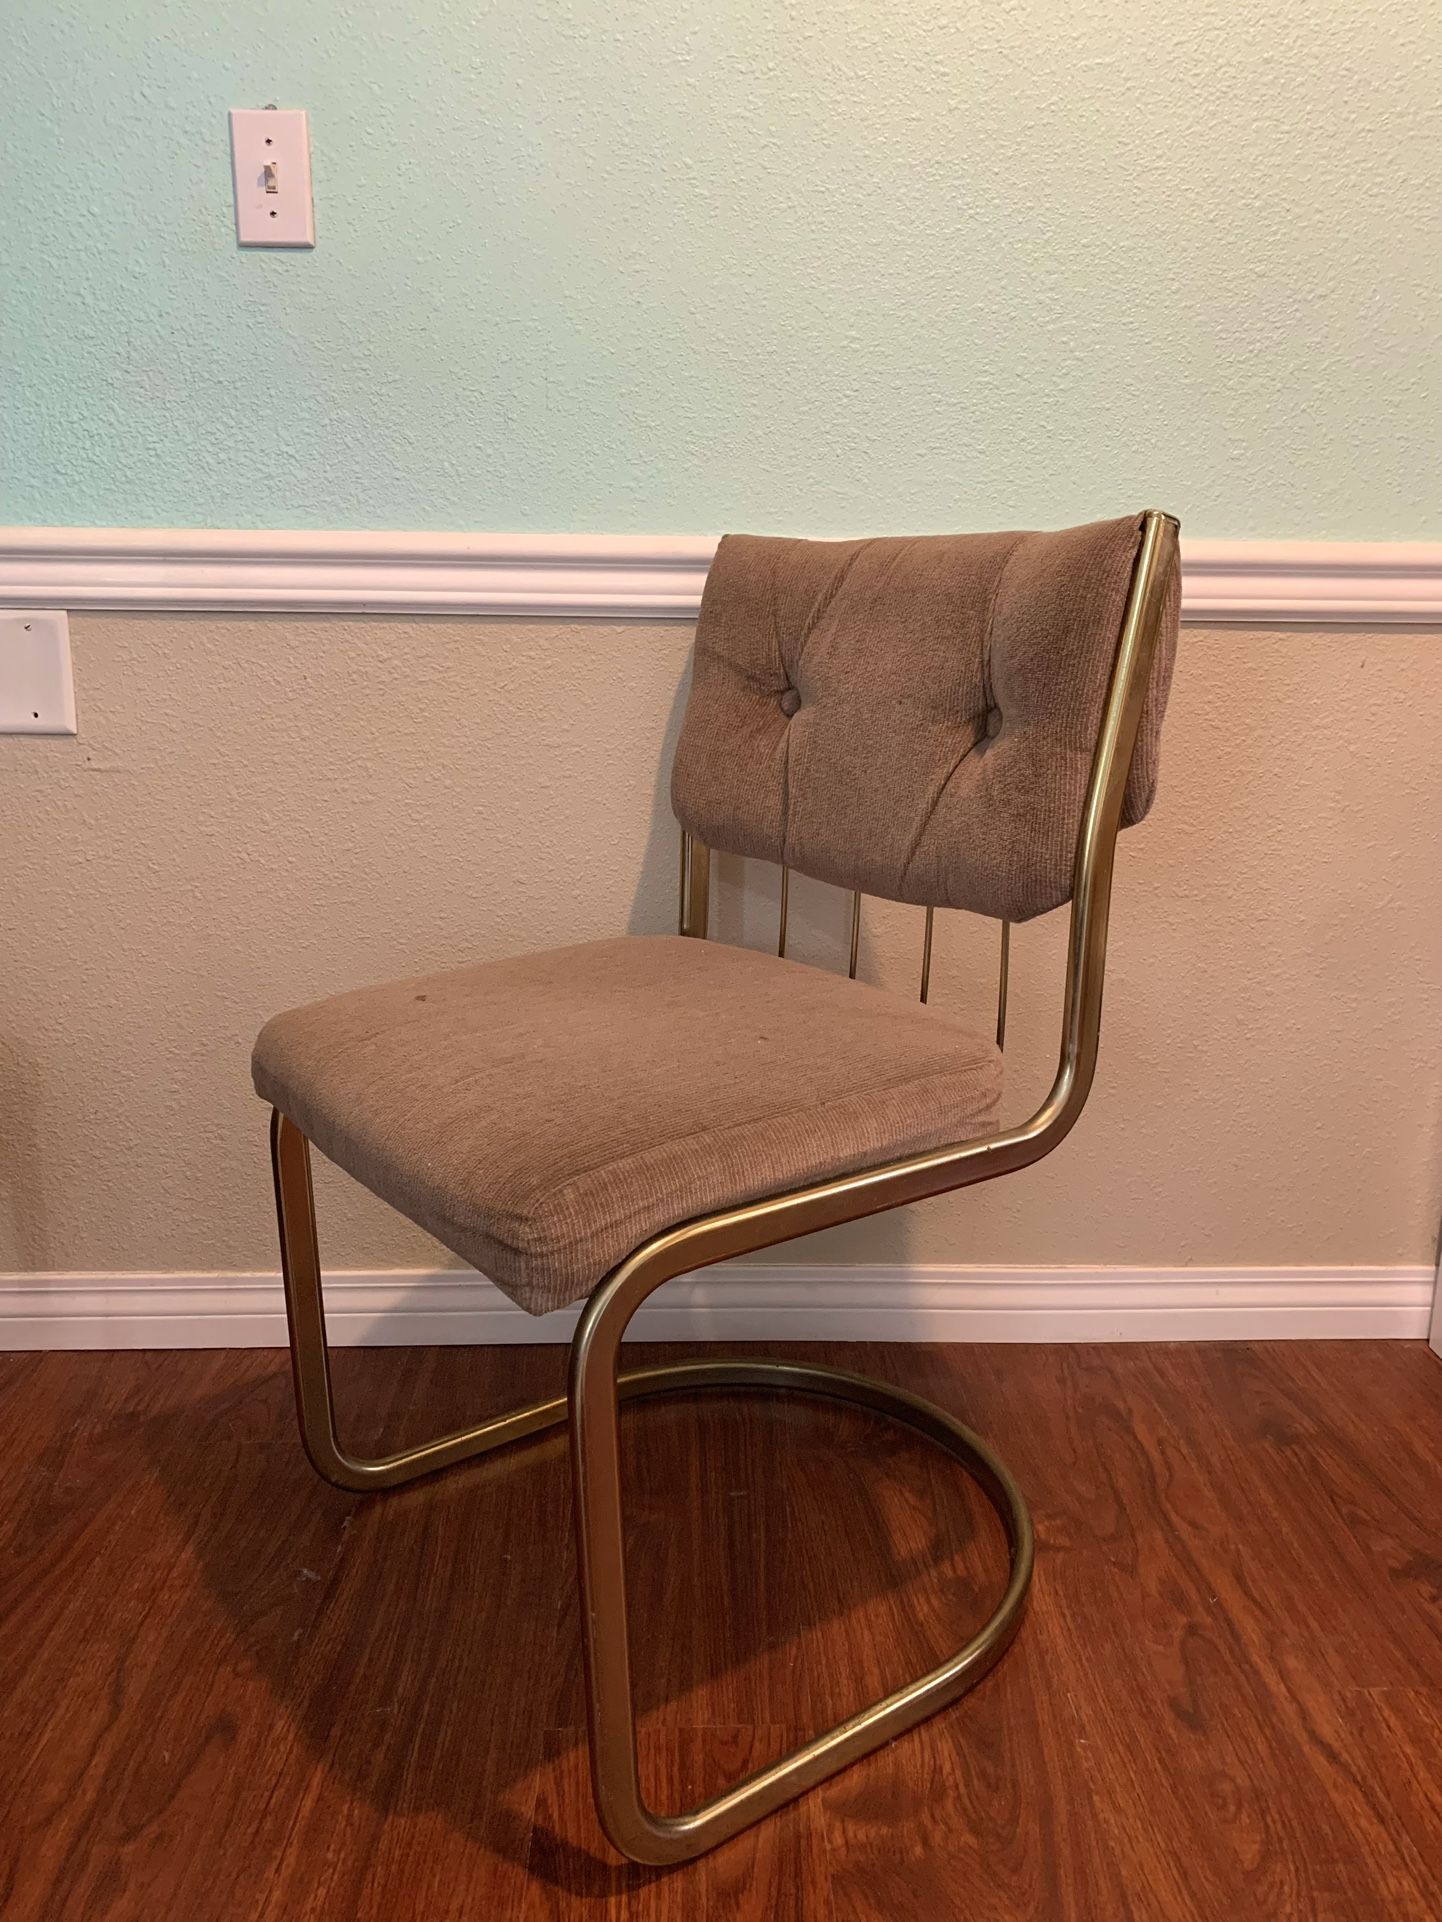 Vintage brass toned cantilever chairs - postmodern mid century